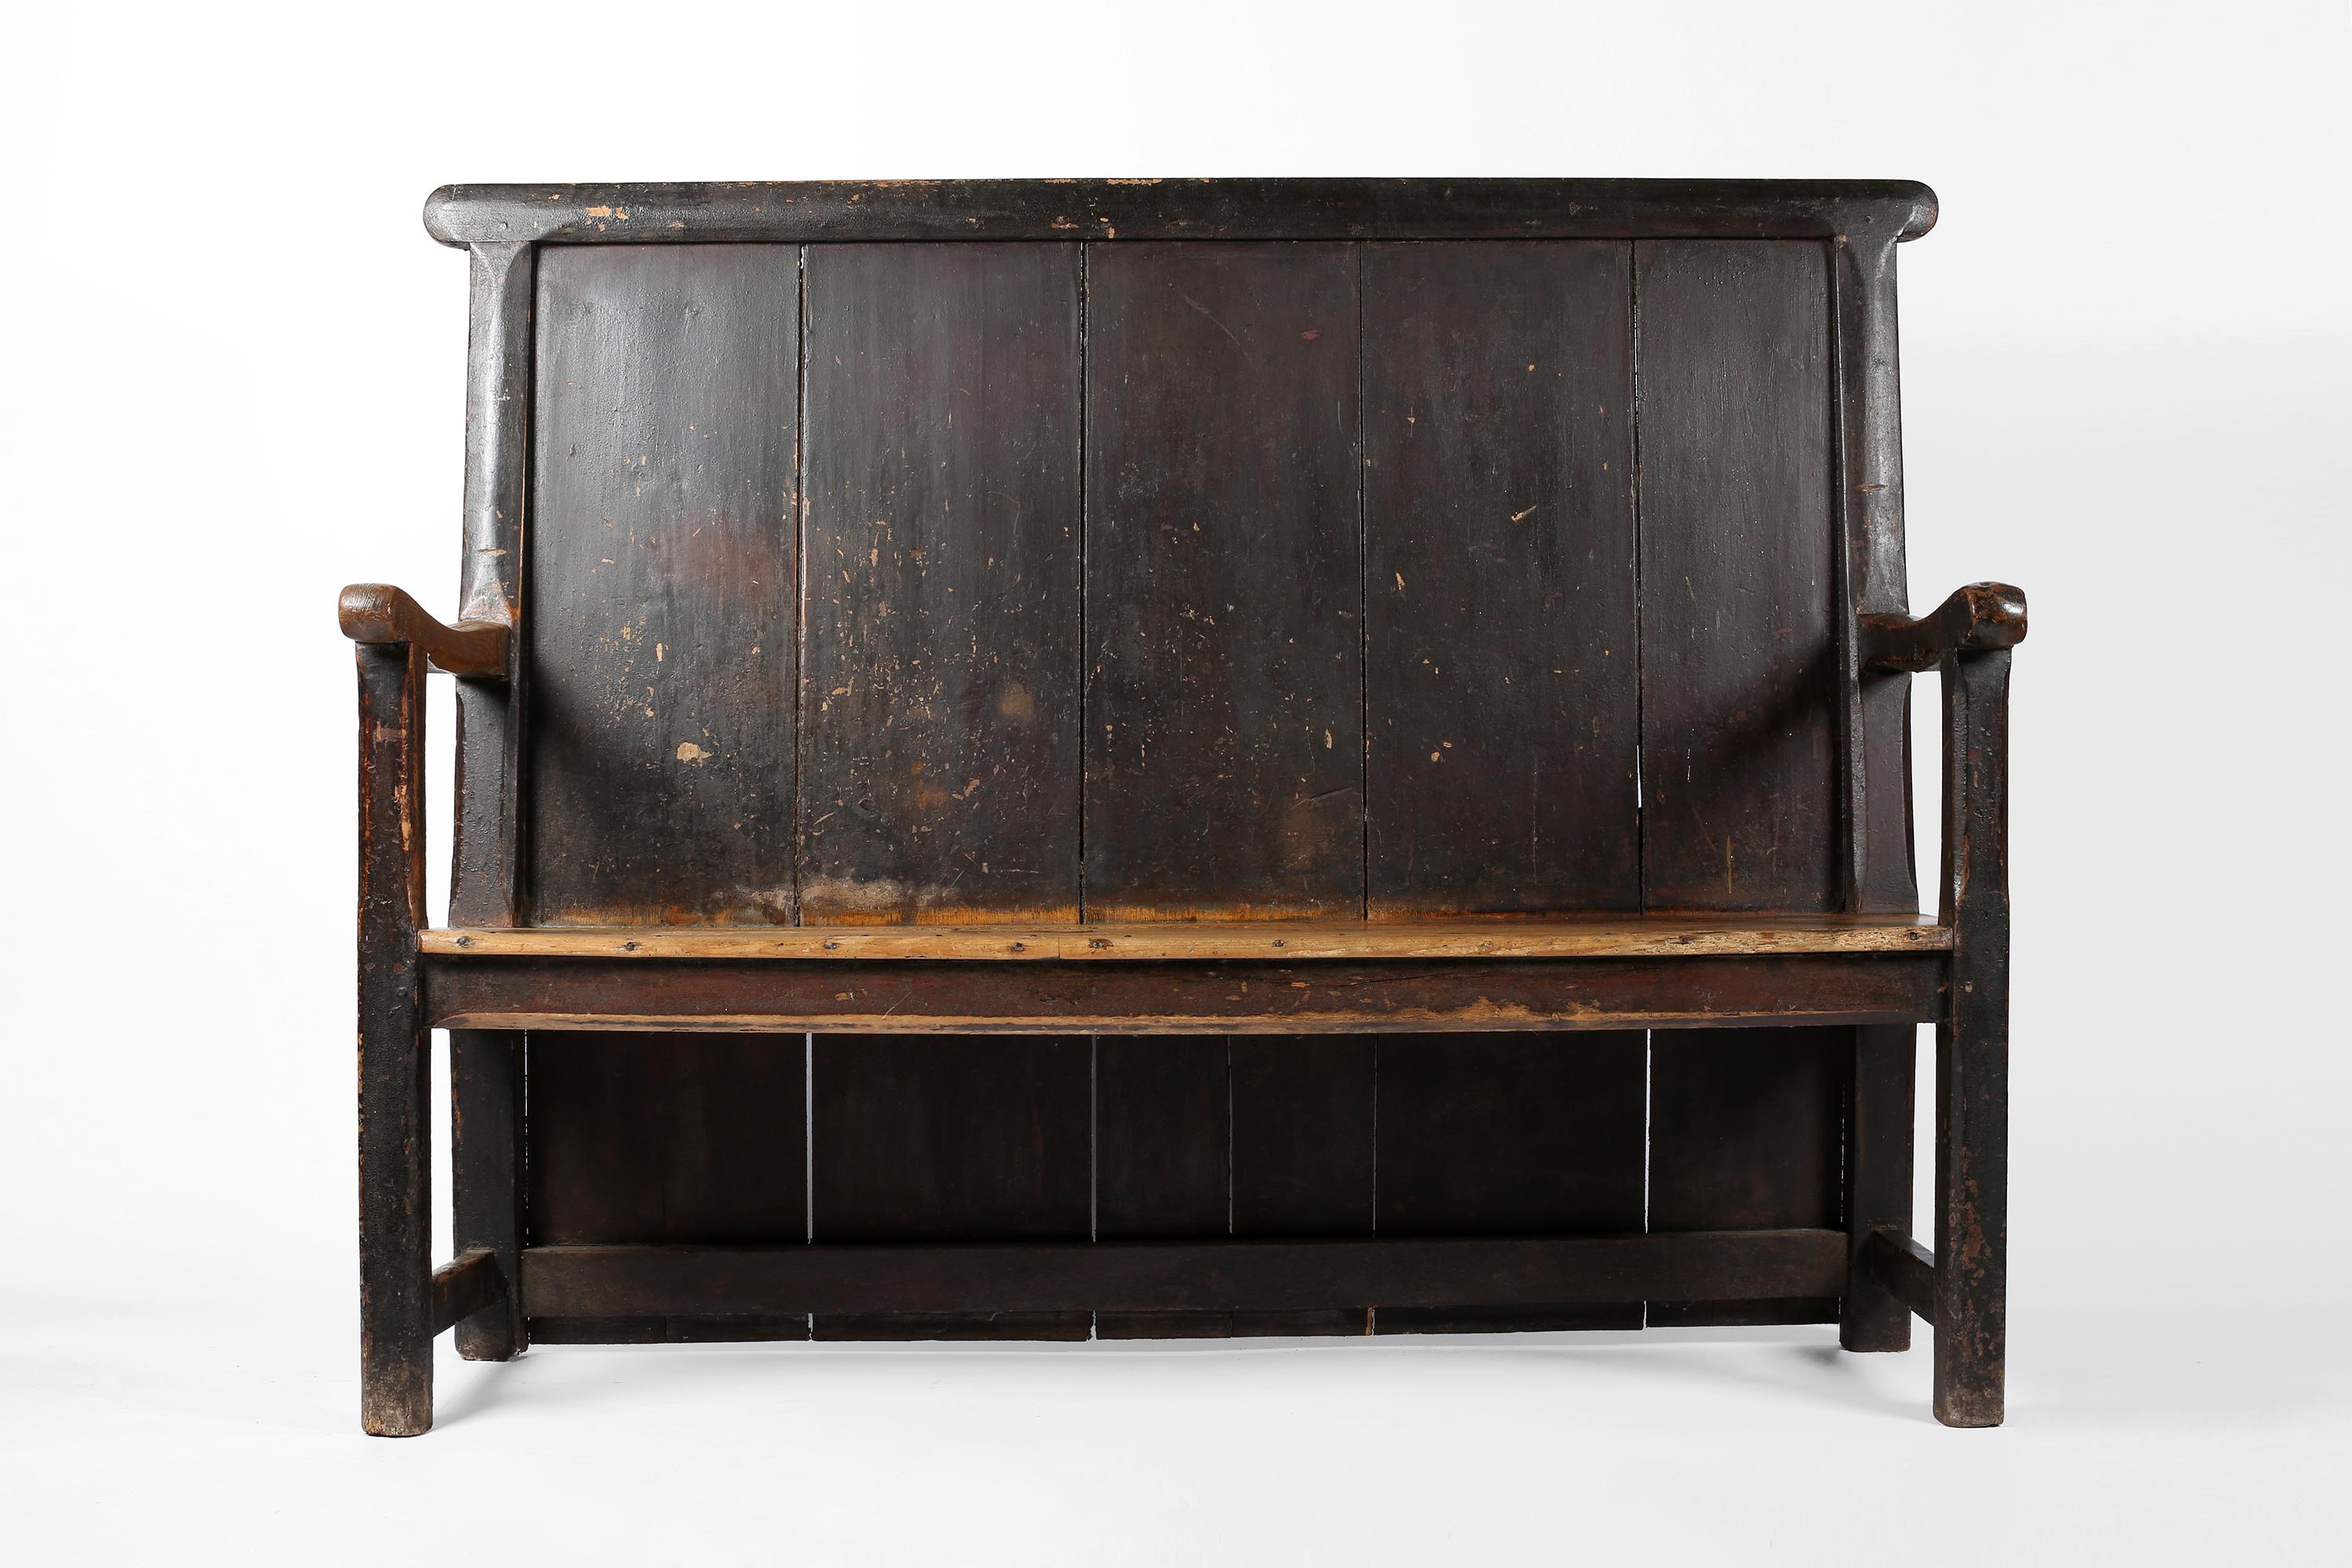 A large, late 18th century carved elm West Country settle, with original paint and attractive wear to the seat and armrests. North Devon, England, c. 1780.